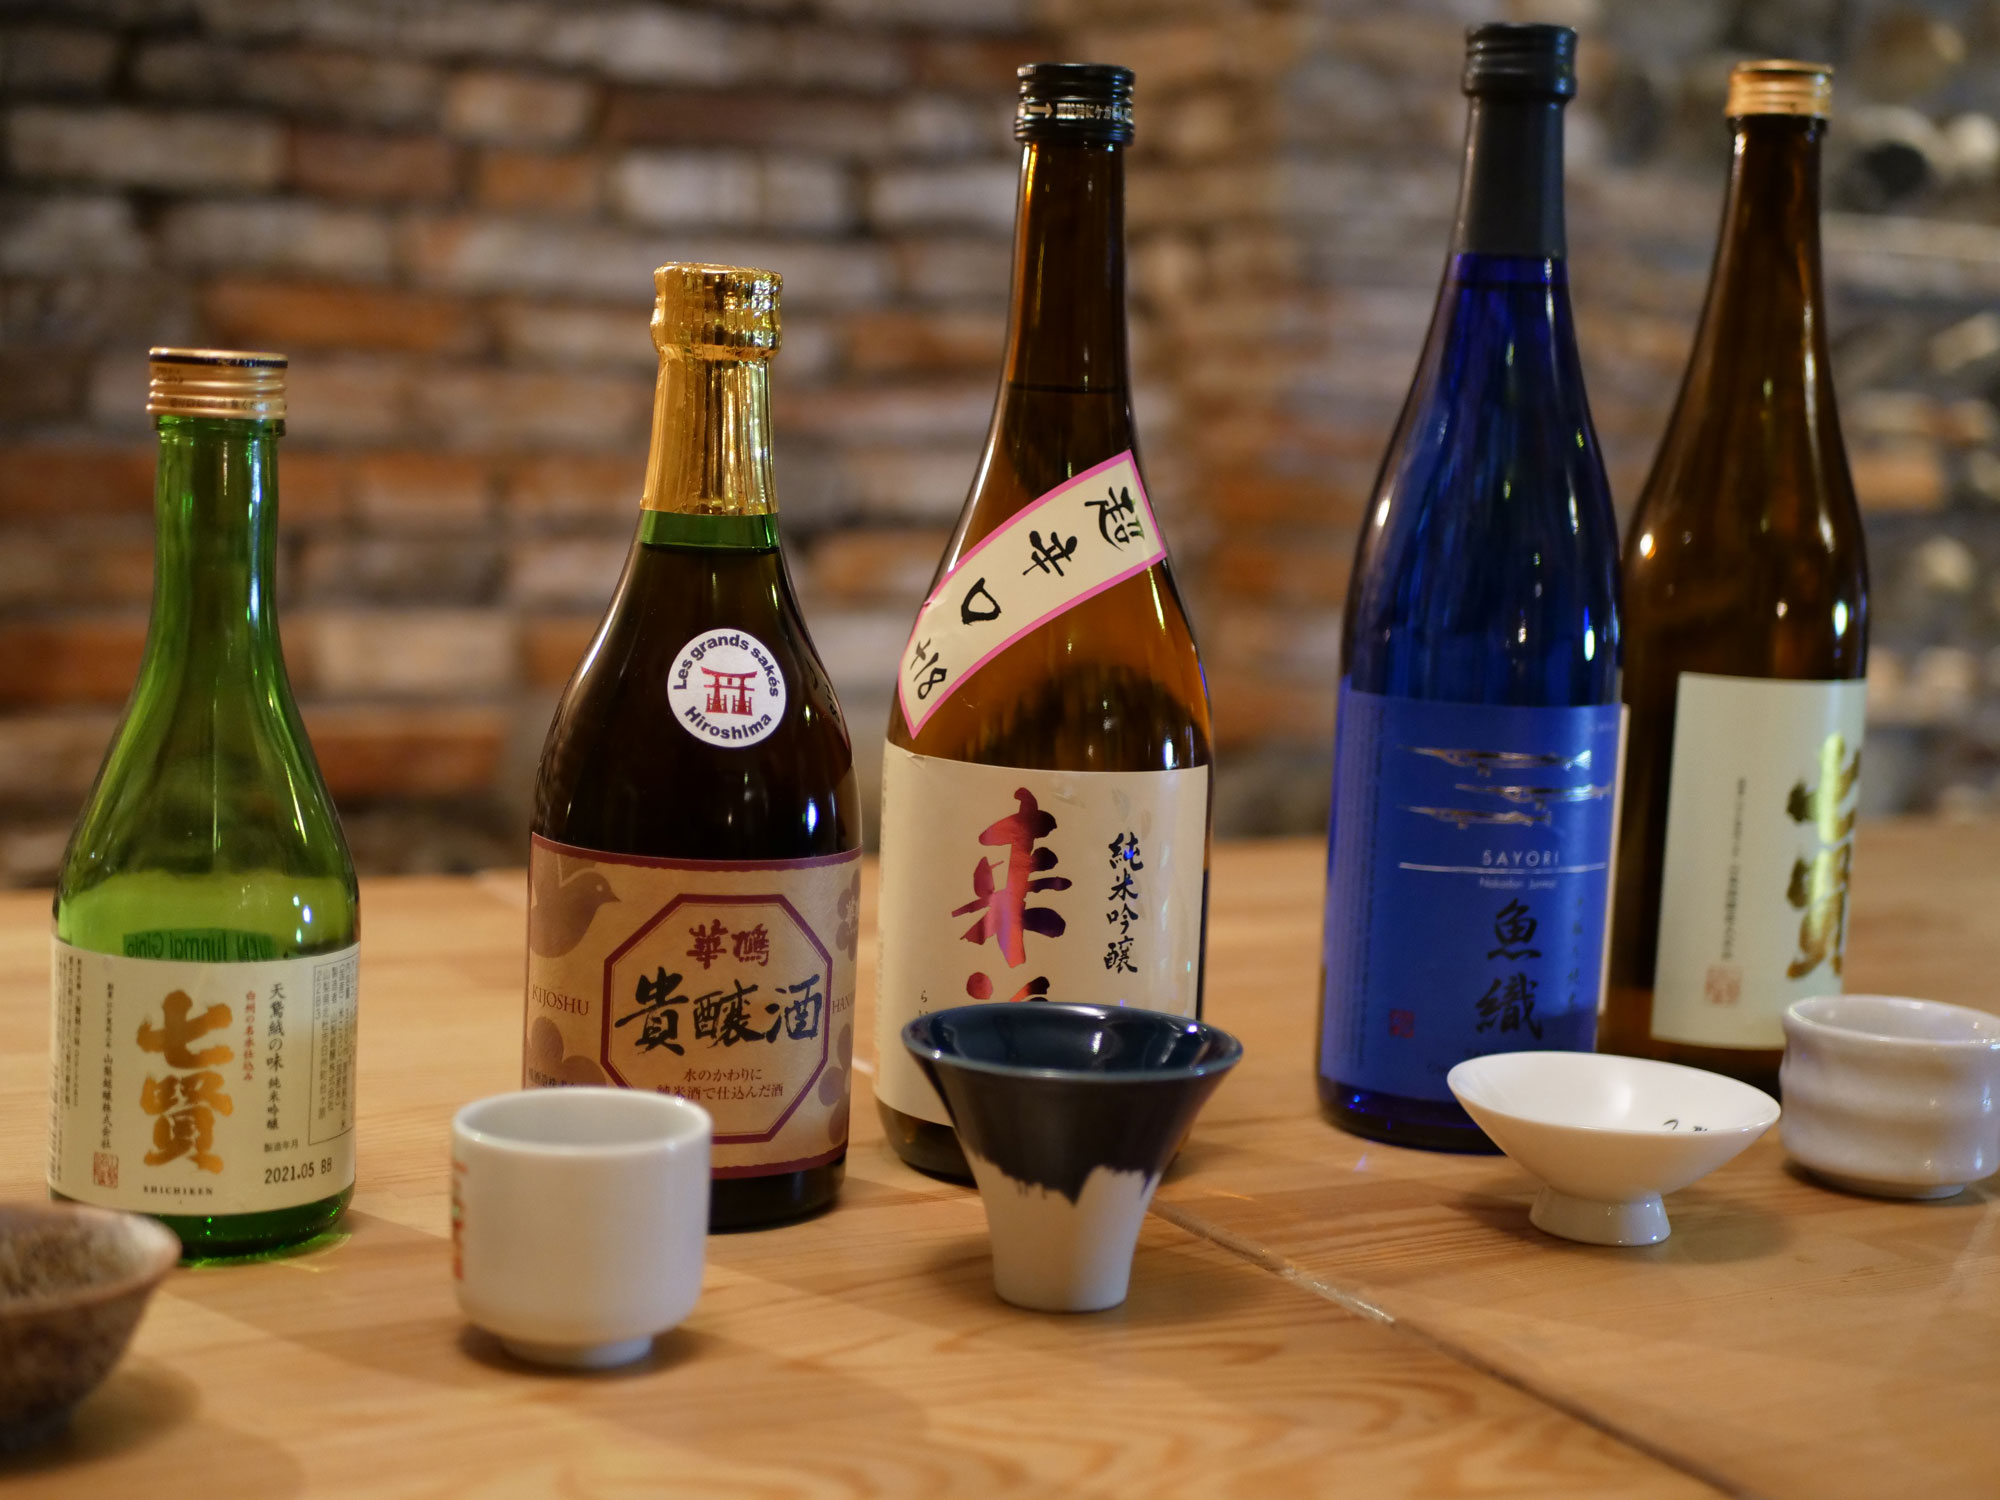 Photograph of bottles of sake with ceramic drinking cups in front of them. The sake bottles vary in height, color, shape, and label.